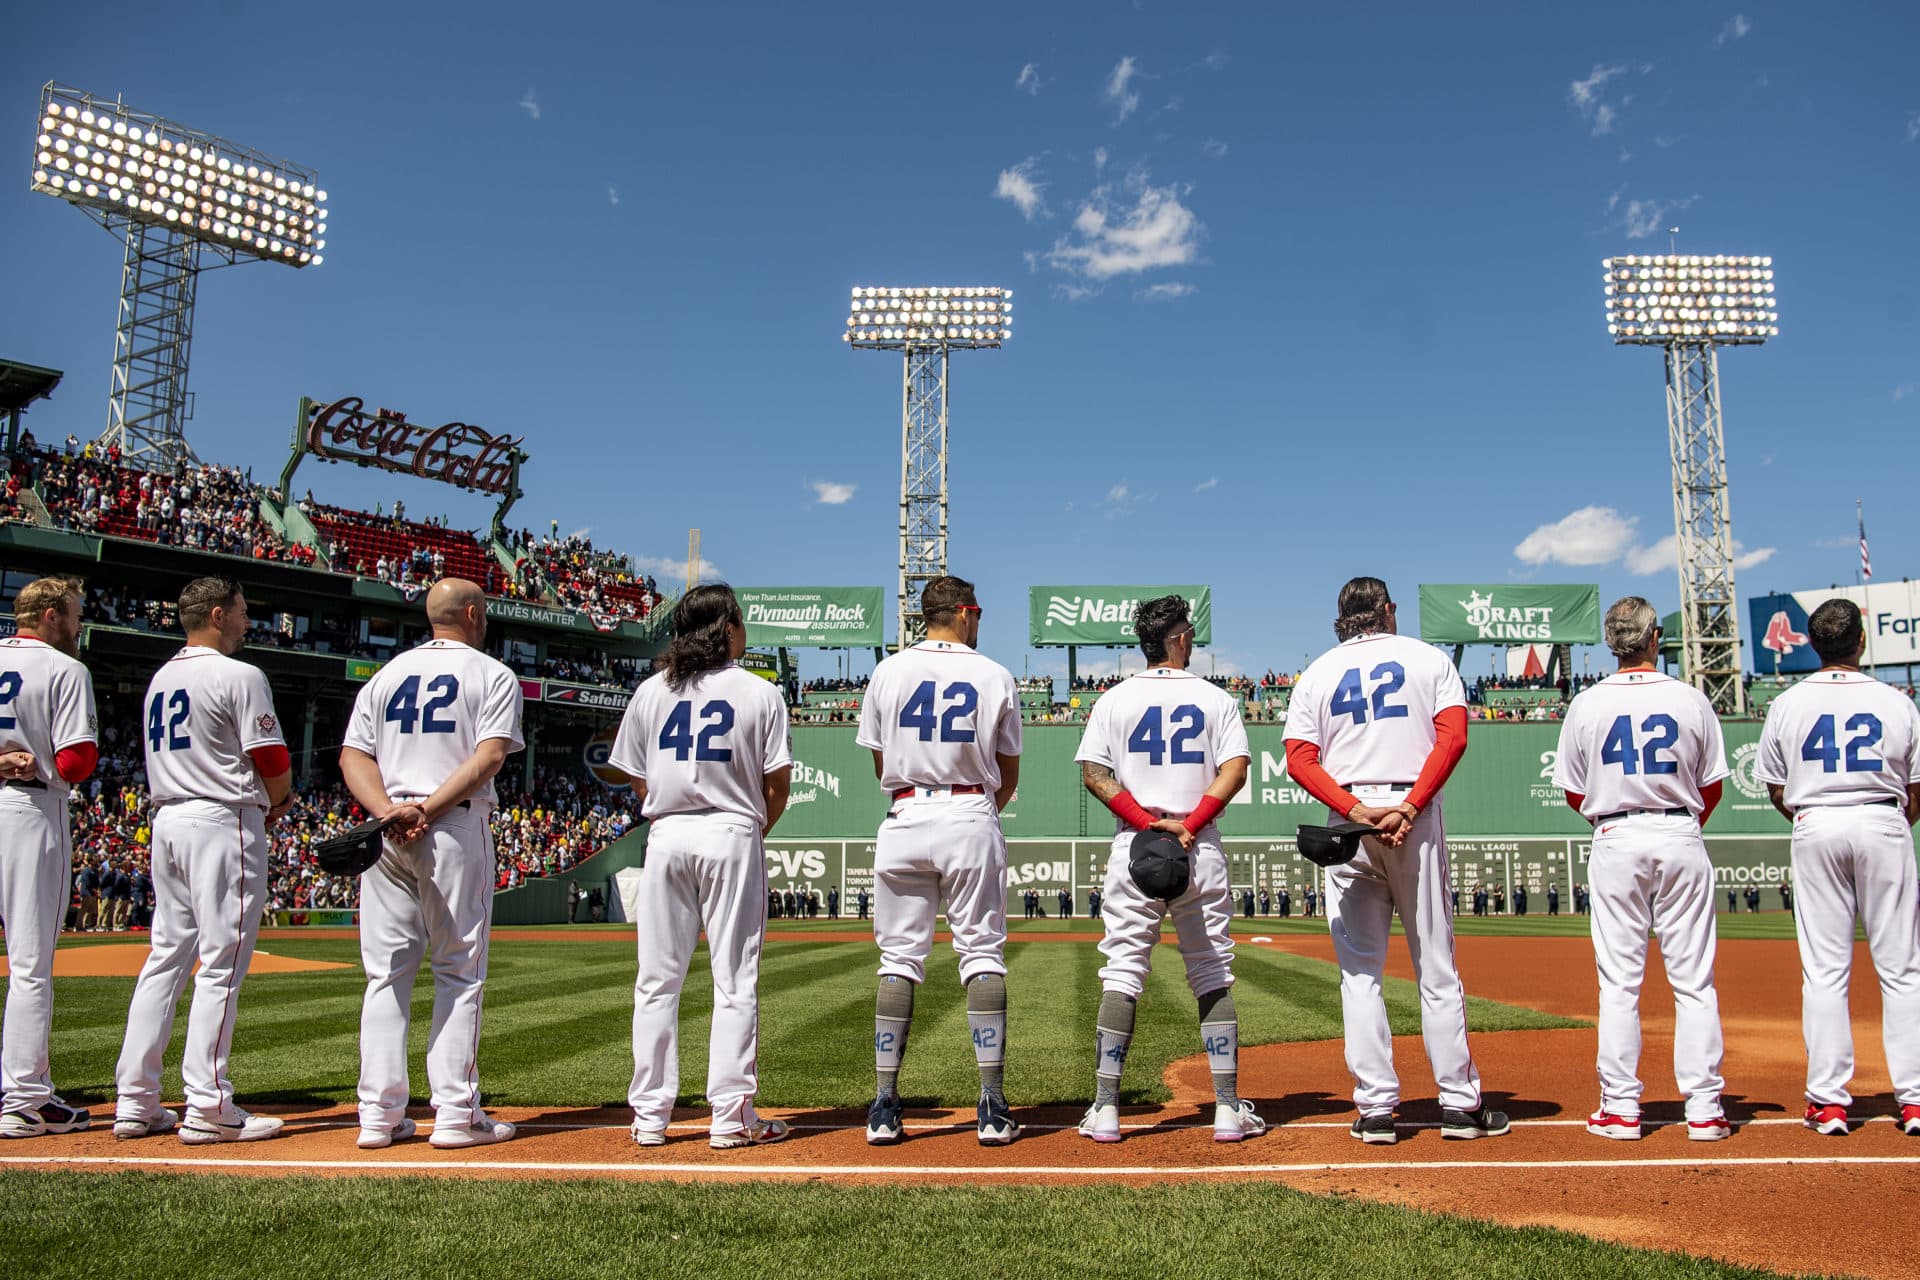 Why are Boston Red Sox players all wearing No. 42 jerseys? Jackie